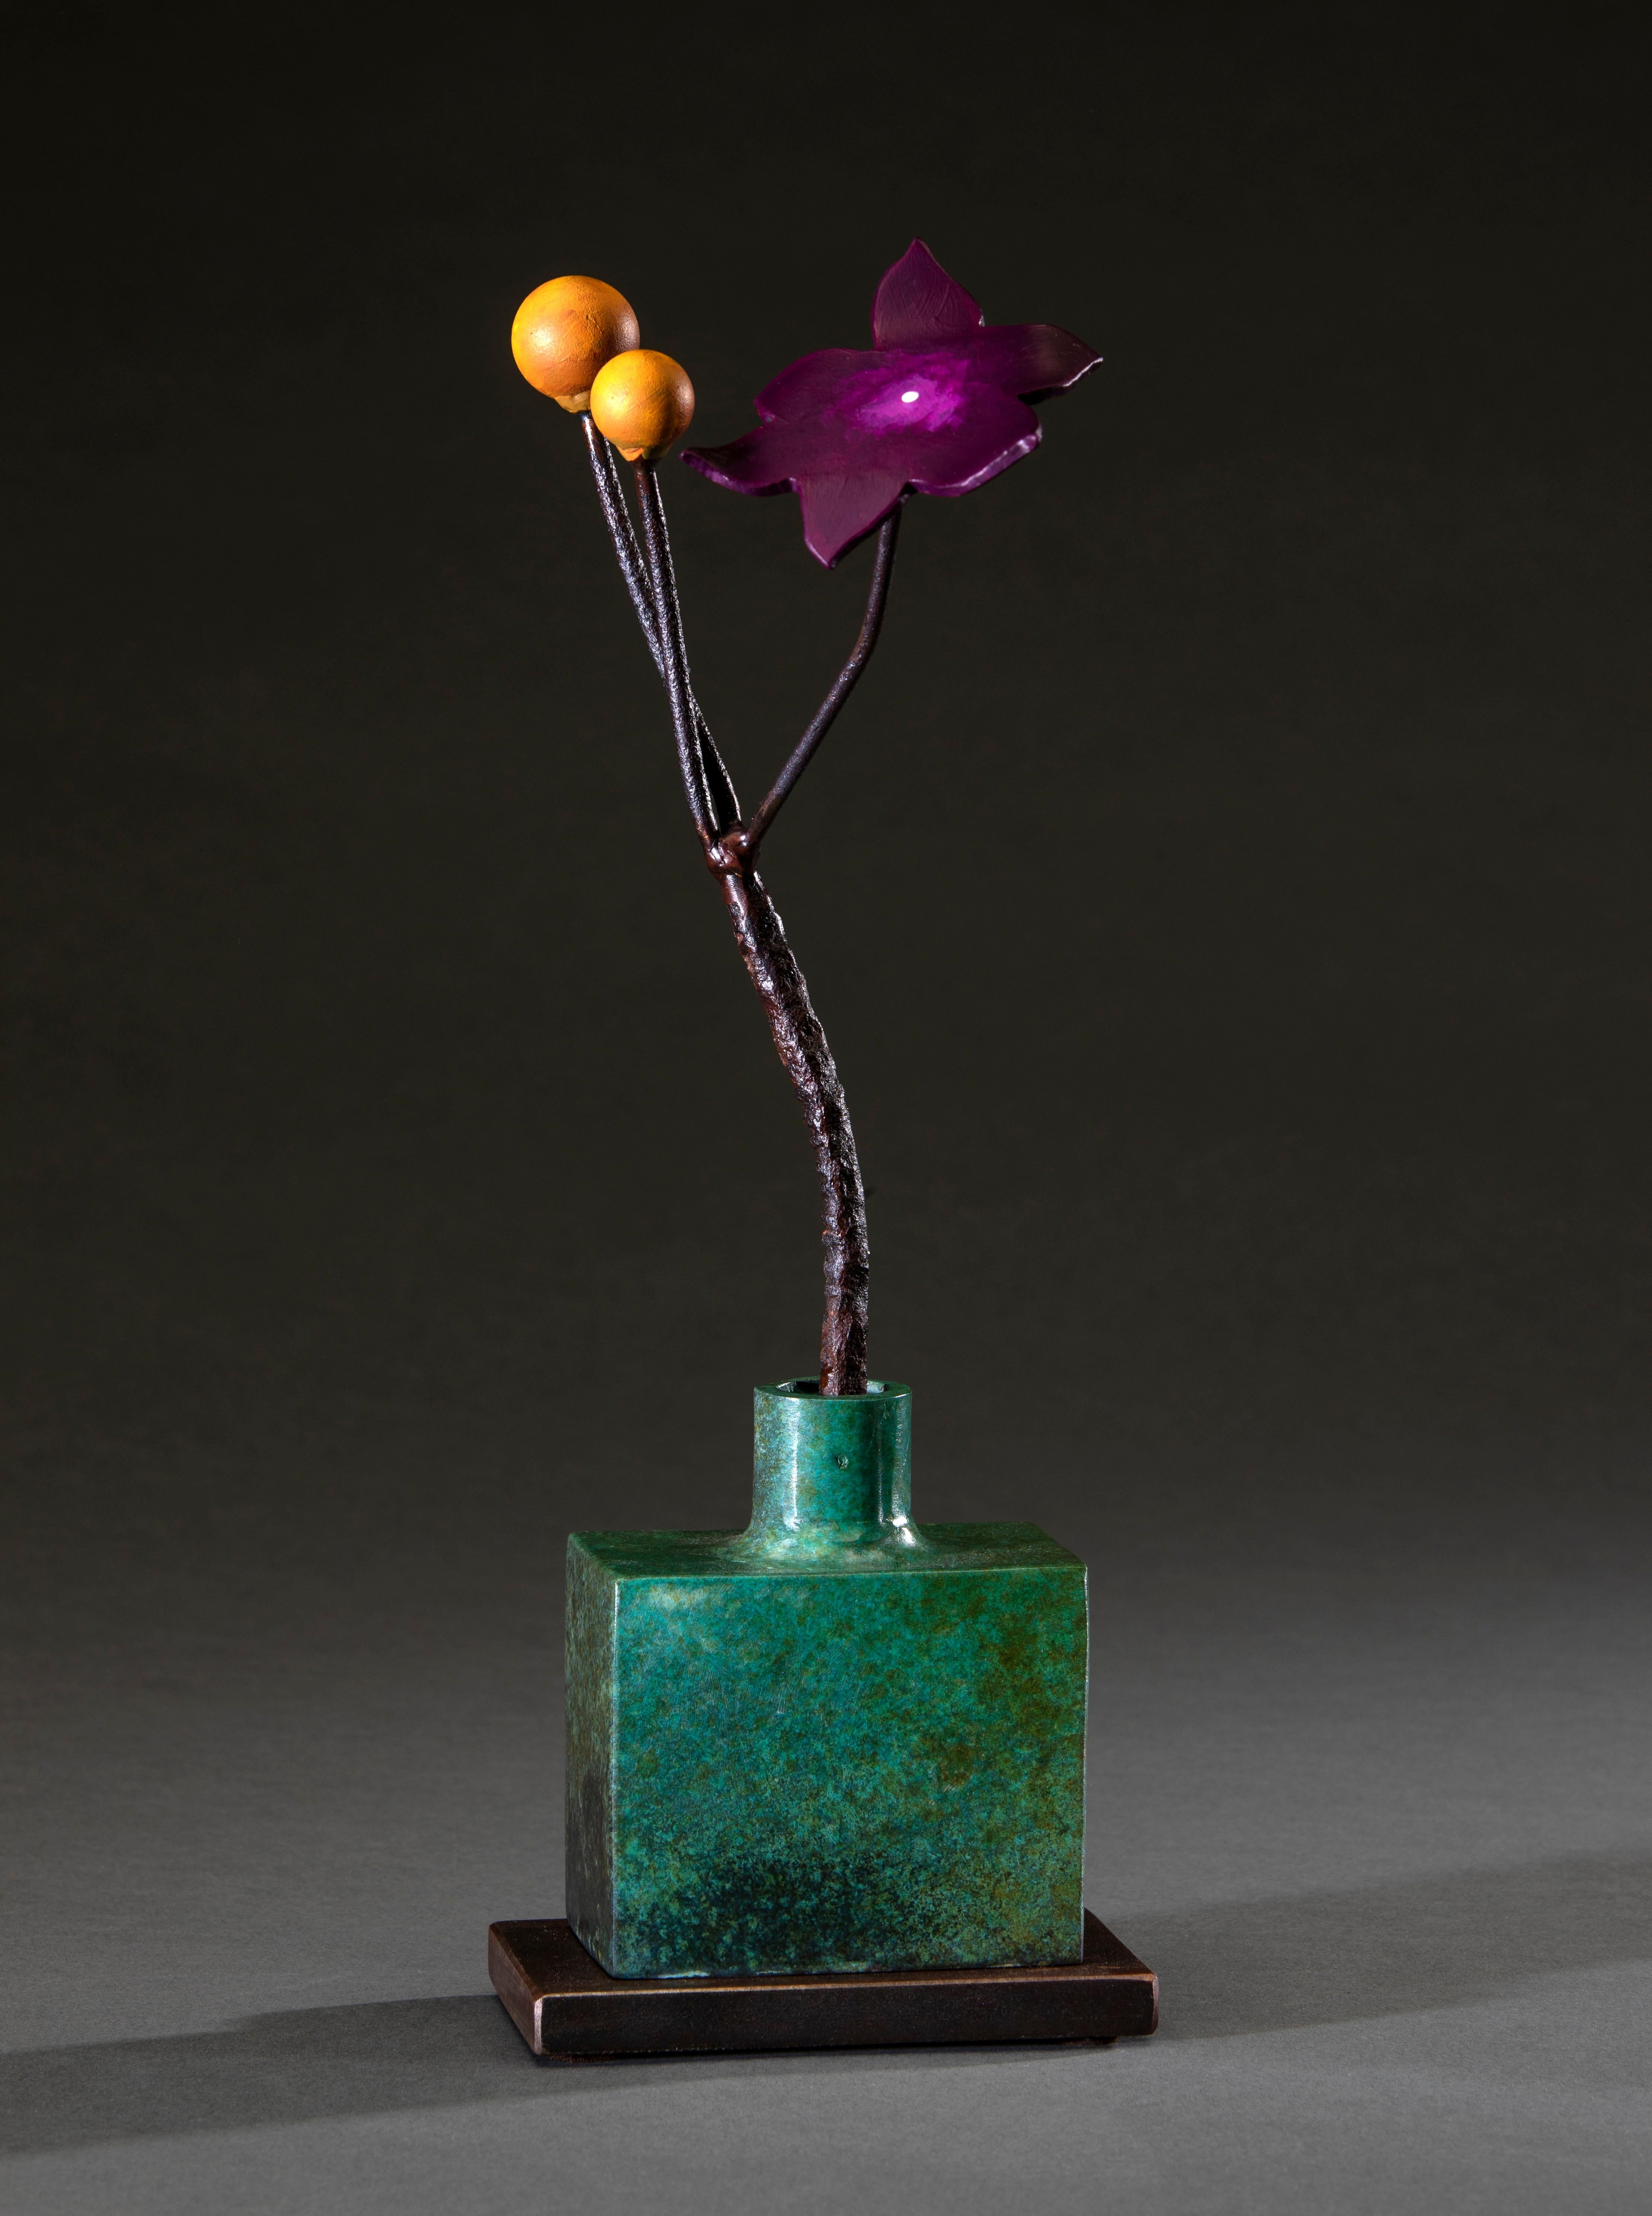 'Green Bottle Ochre Seeds' by David Kimball Anderson, 2022. Bronze, steel, and paint, 16 x 6 x 5 in. This sculpture features a  square vase cast in bronze and finished with a green patina. It features a steel flower painted in purple with two yellow